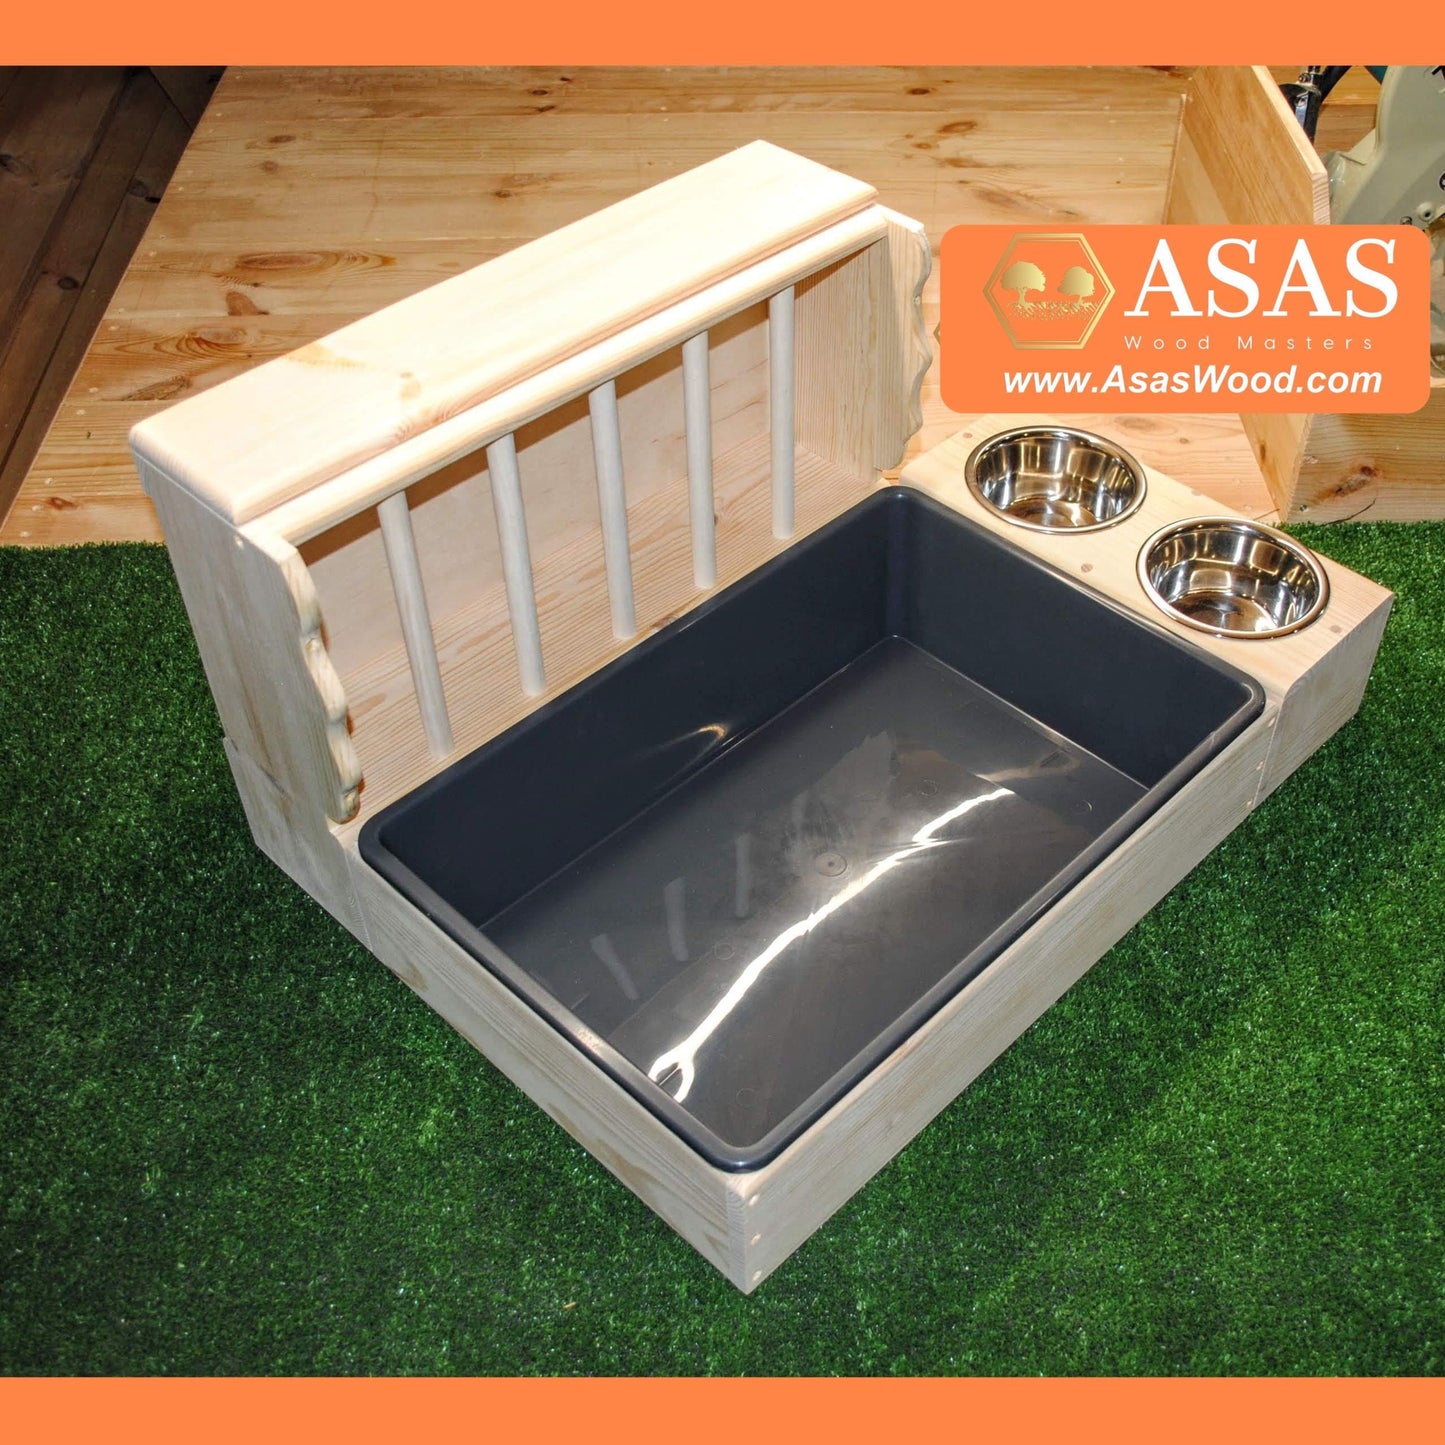 rabbit hay feeder with litter box and food / drink bowls station, large size. Grey color litter tray